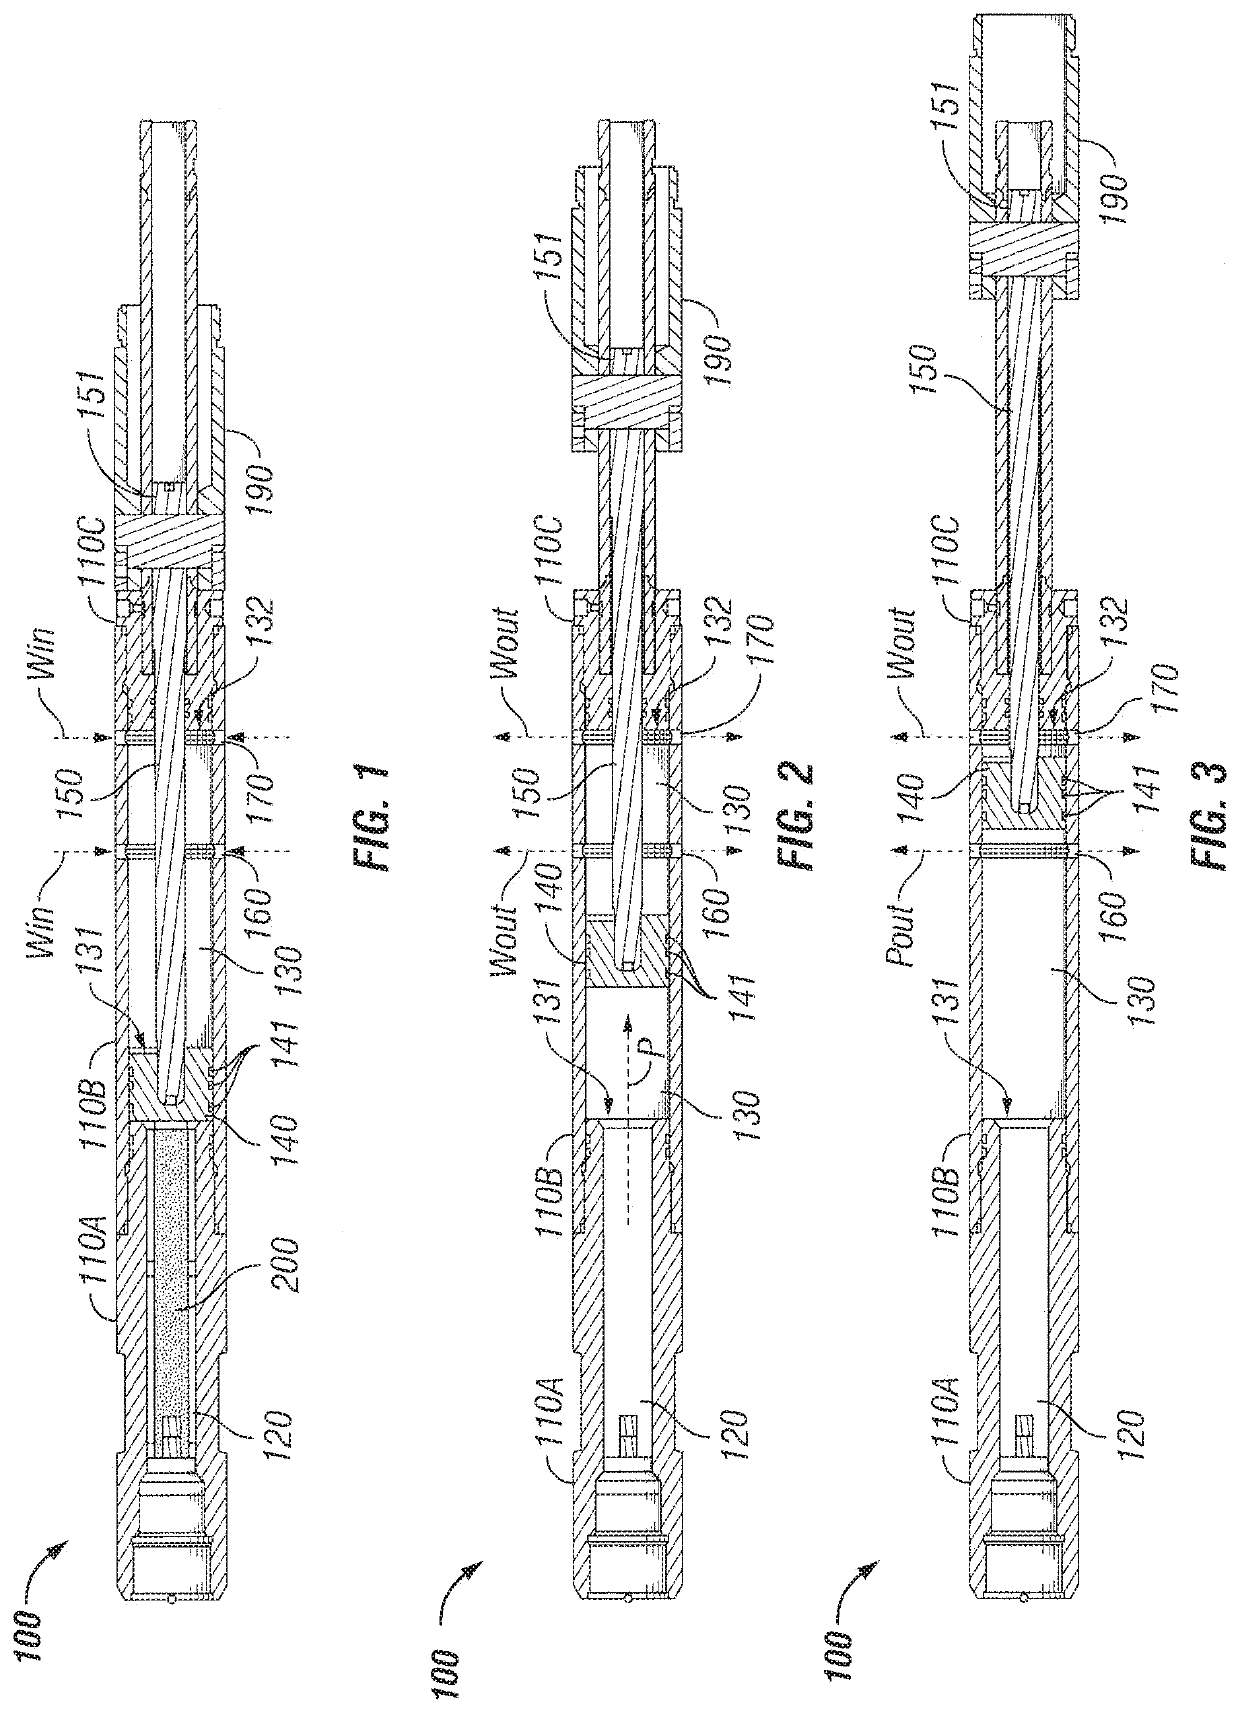 Self Venting Setting Tool That Utilizes Wellbore Fluid to Dampen Setting Motion